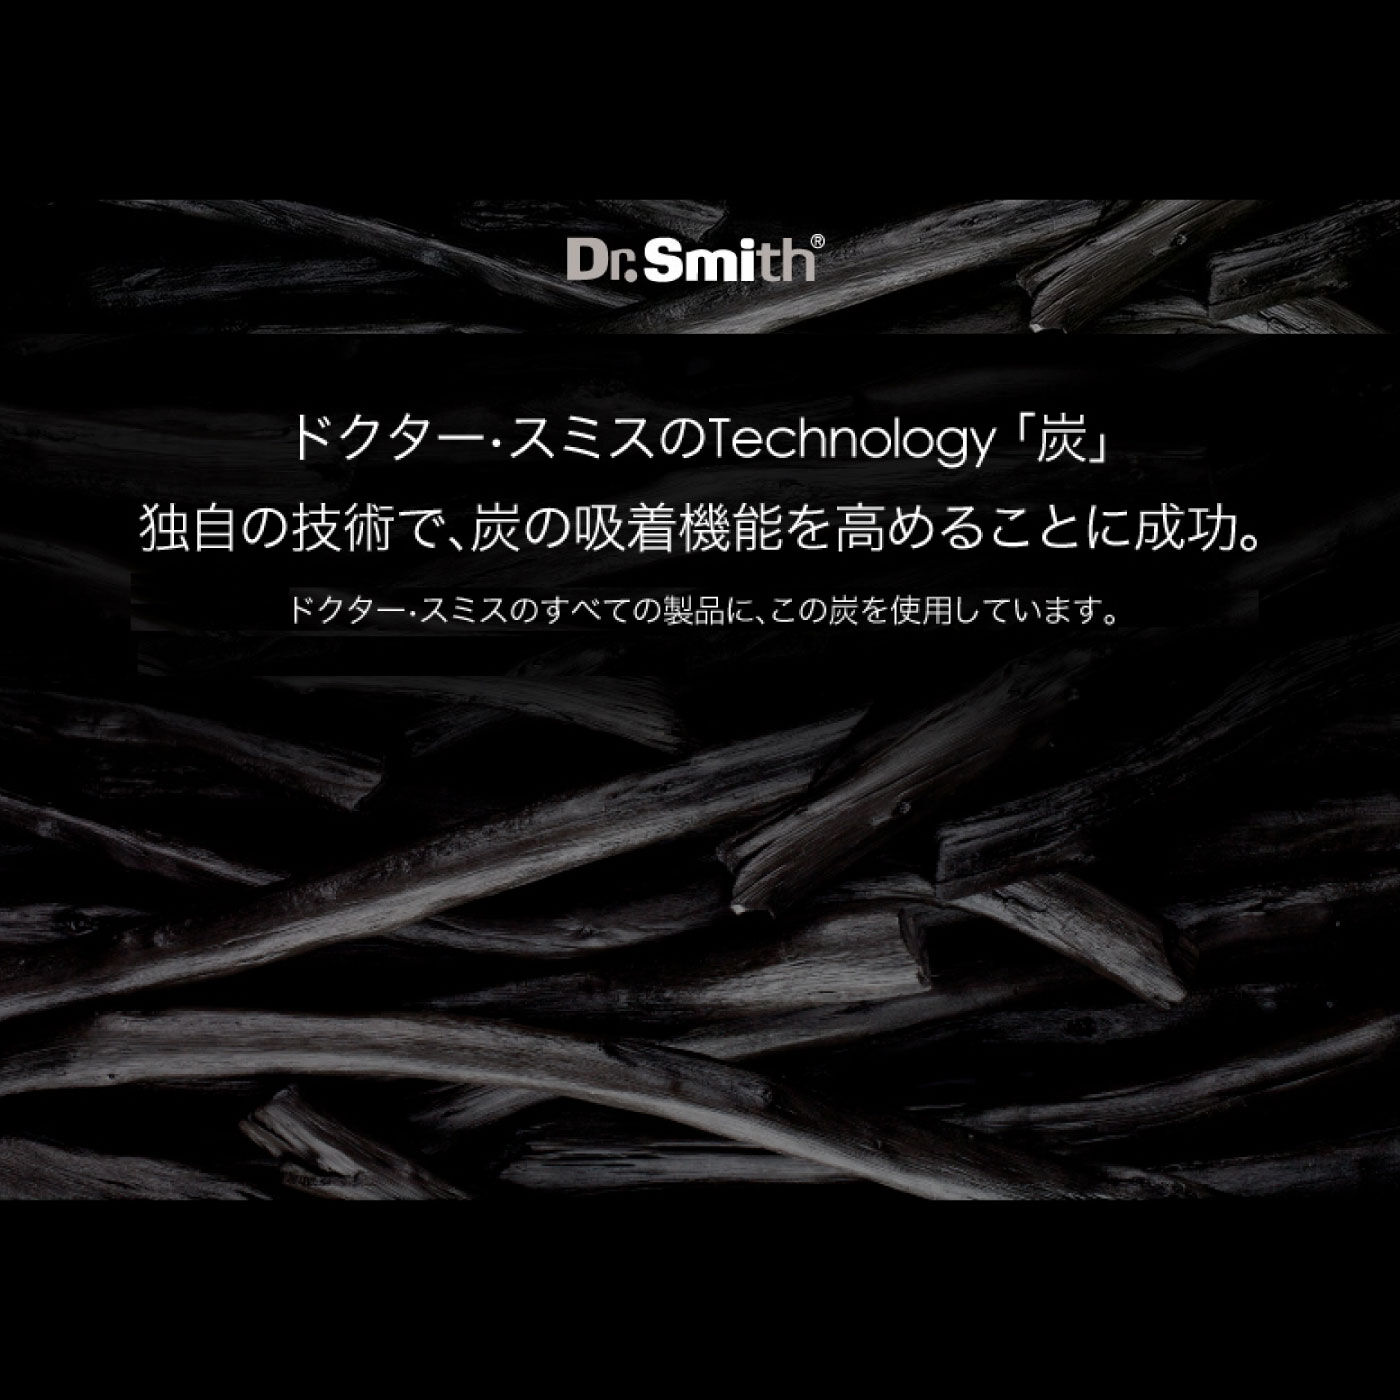 FELISSIMO PARTNERS|さわやかな朝のめざめ　Dr．Smith　炭わた入り枕（小）